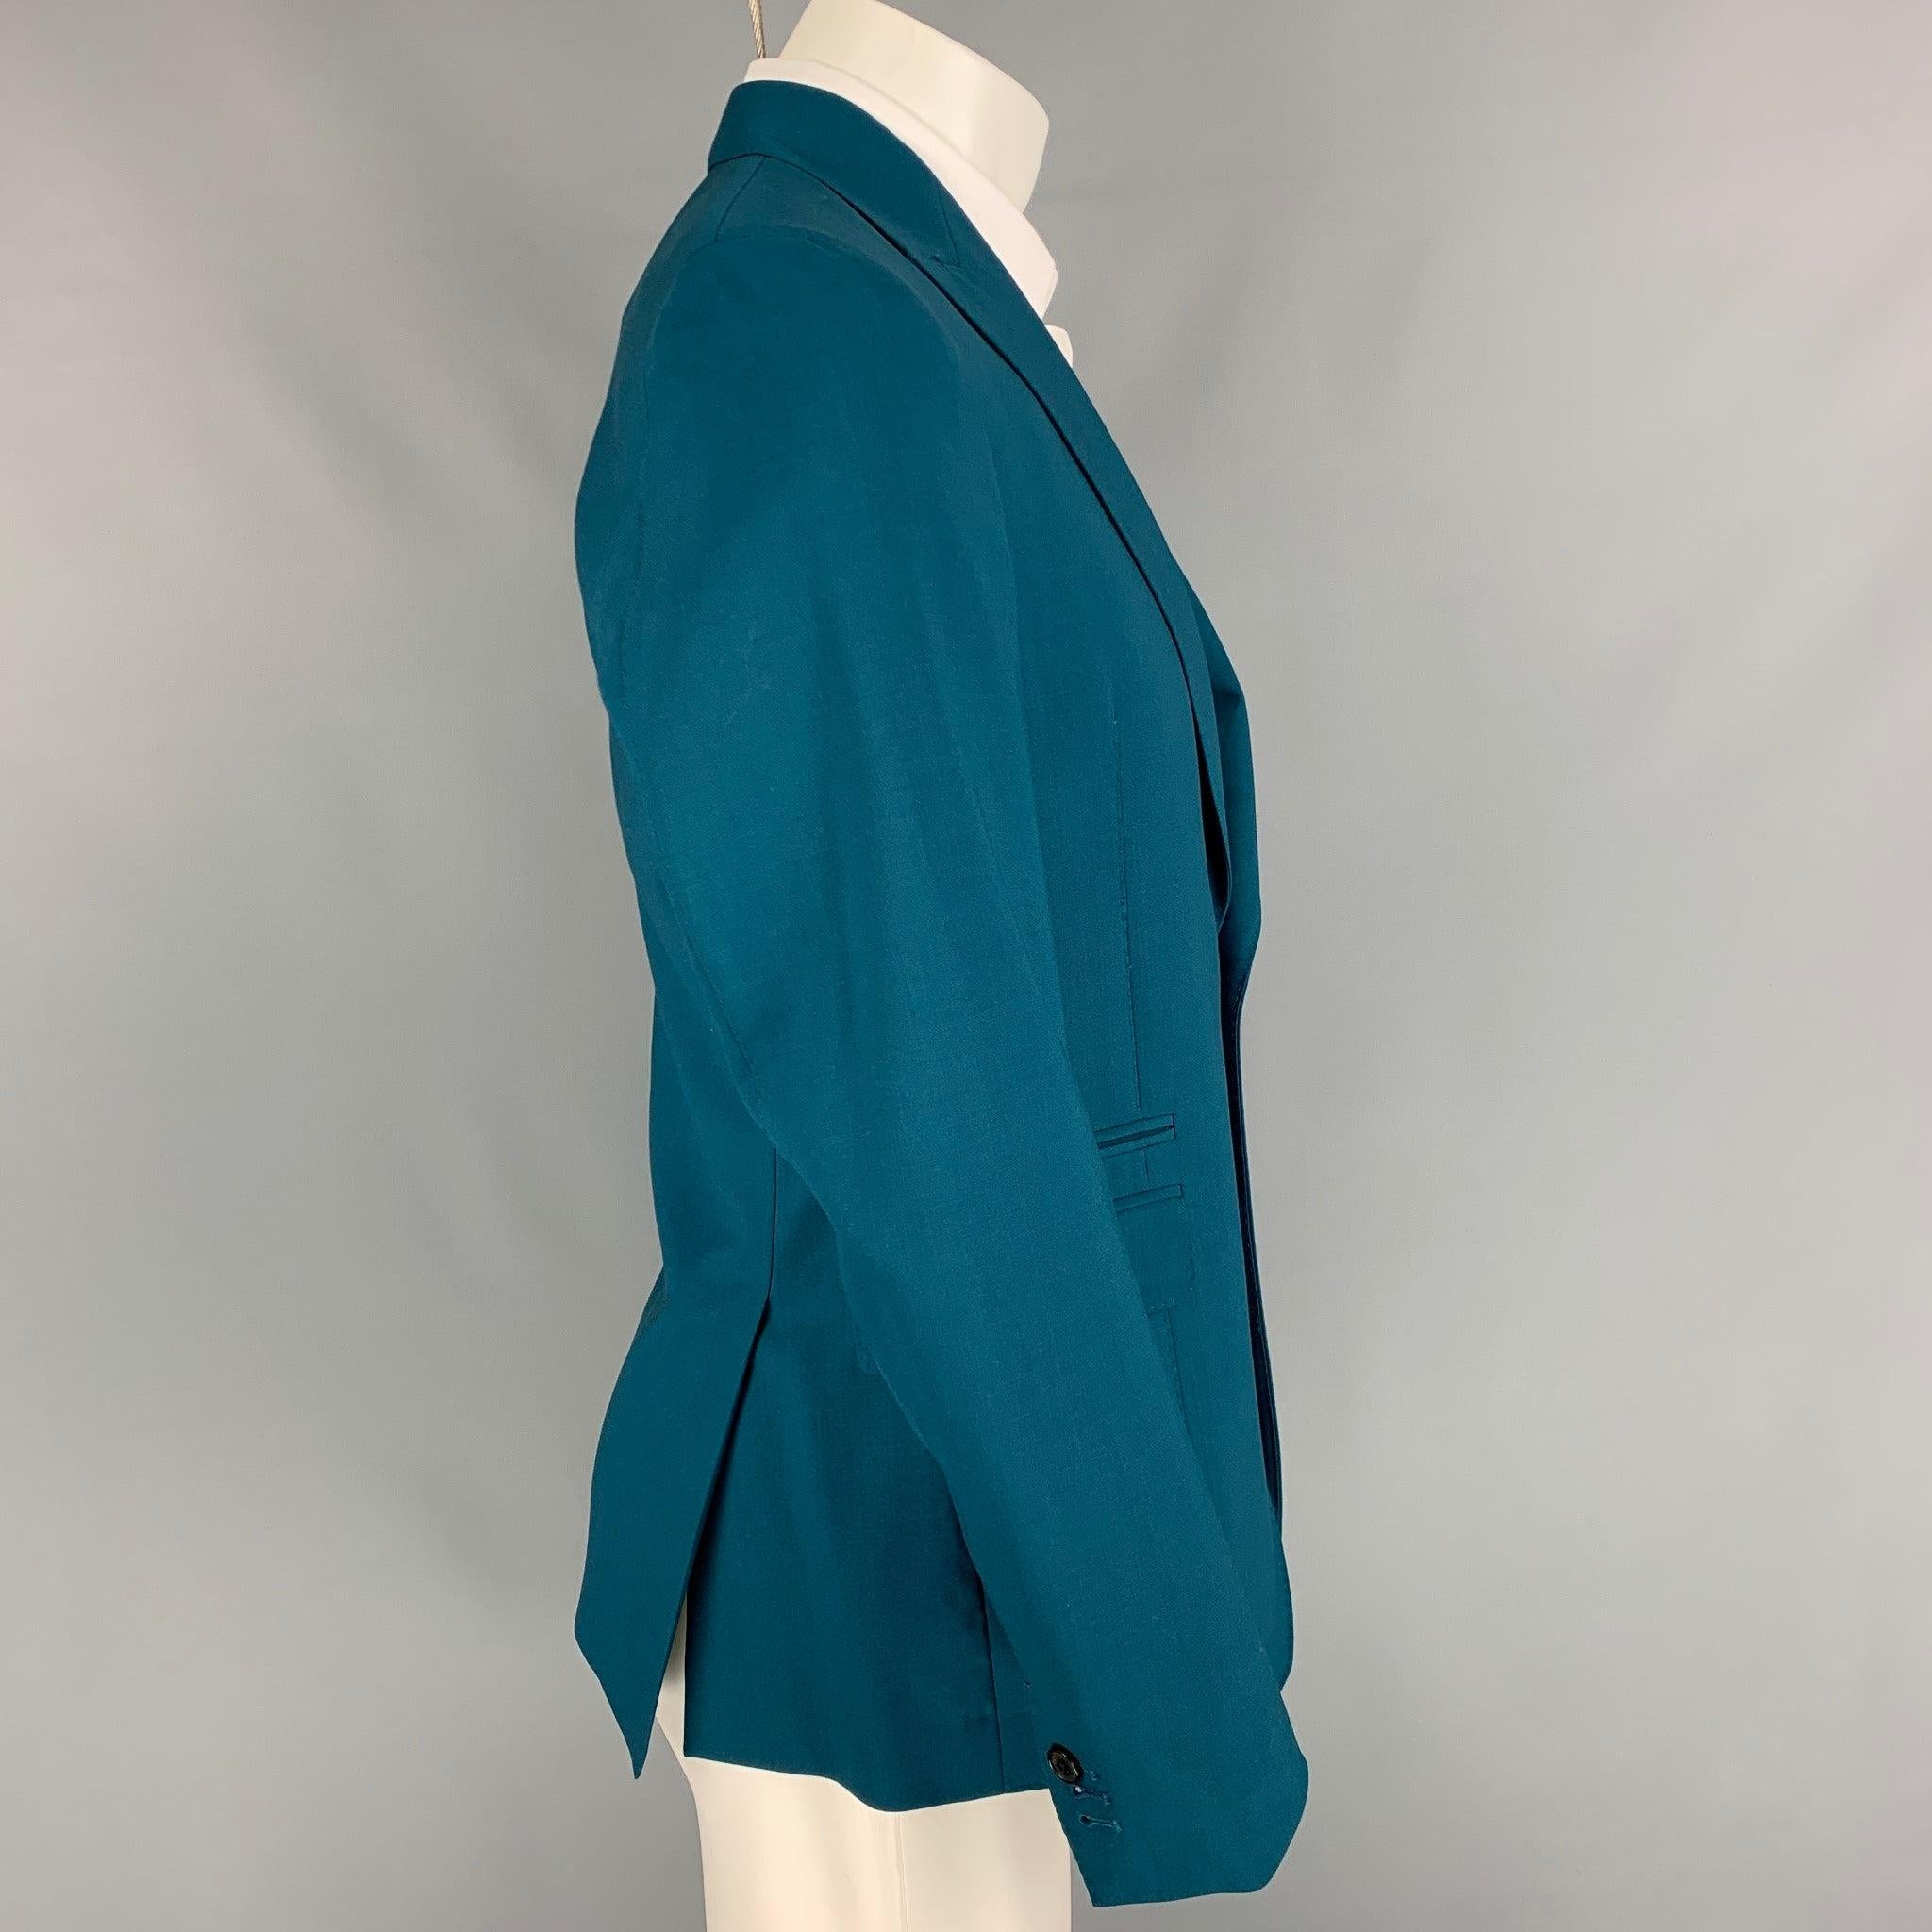 PAUL SMITH Soho Fit Size 38 Teal Peak Lapel Regular Wool Sport Coat In Good Condition For Sale In San Francisco, CA